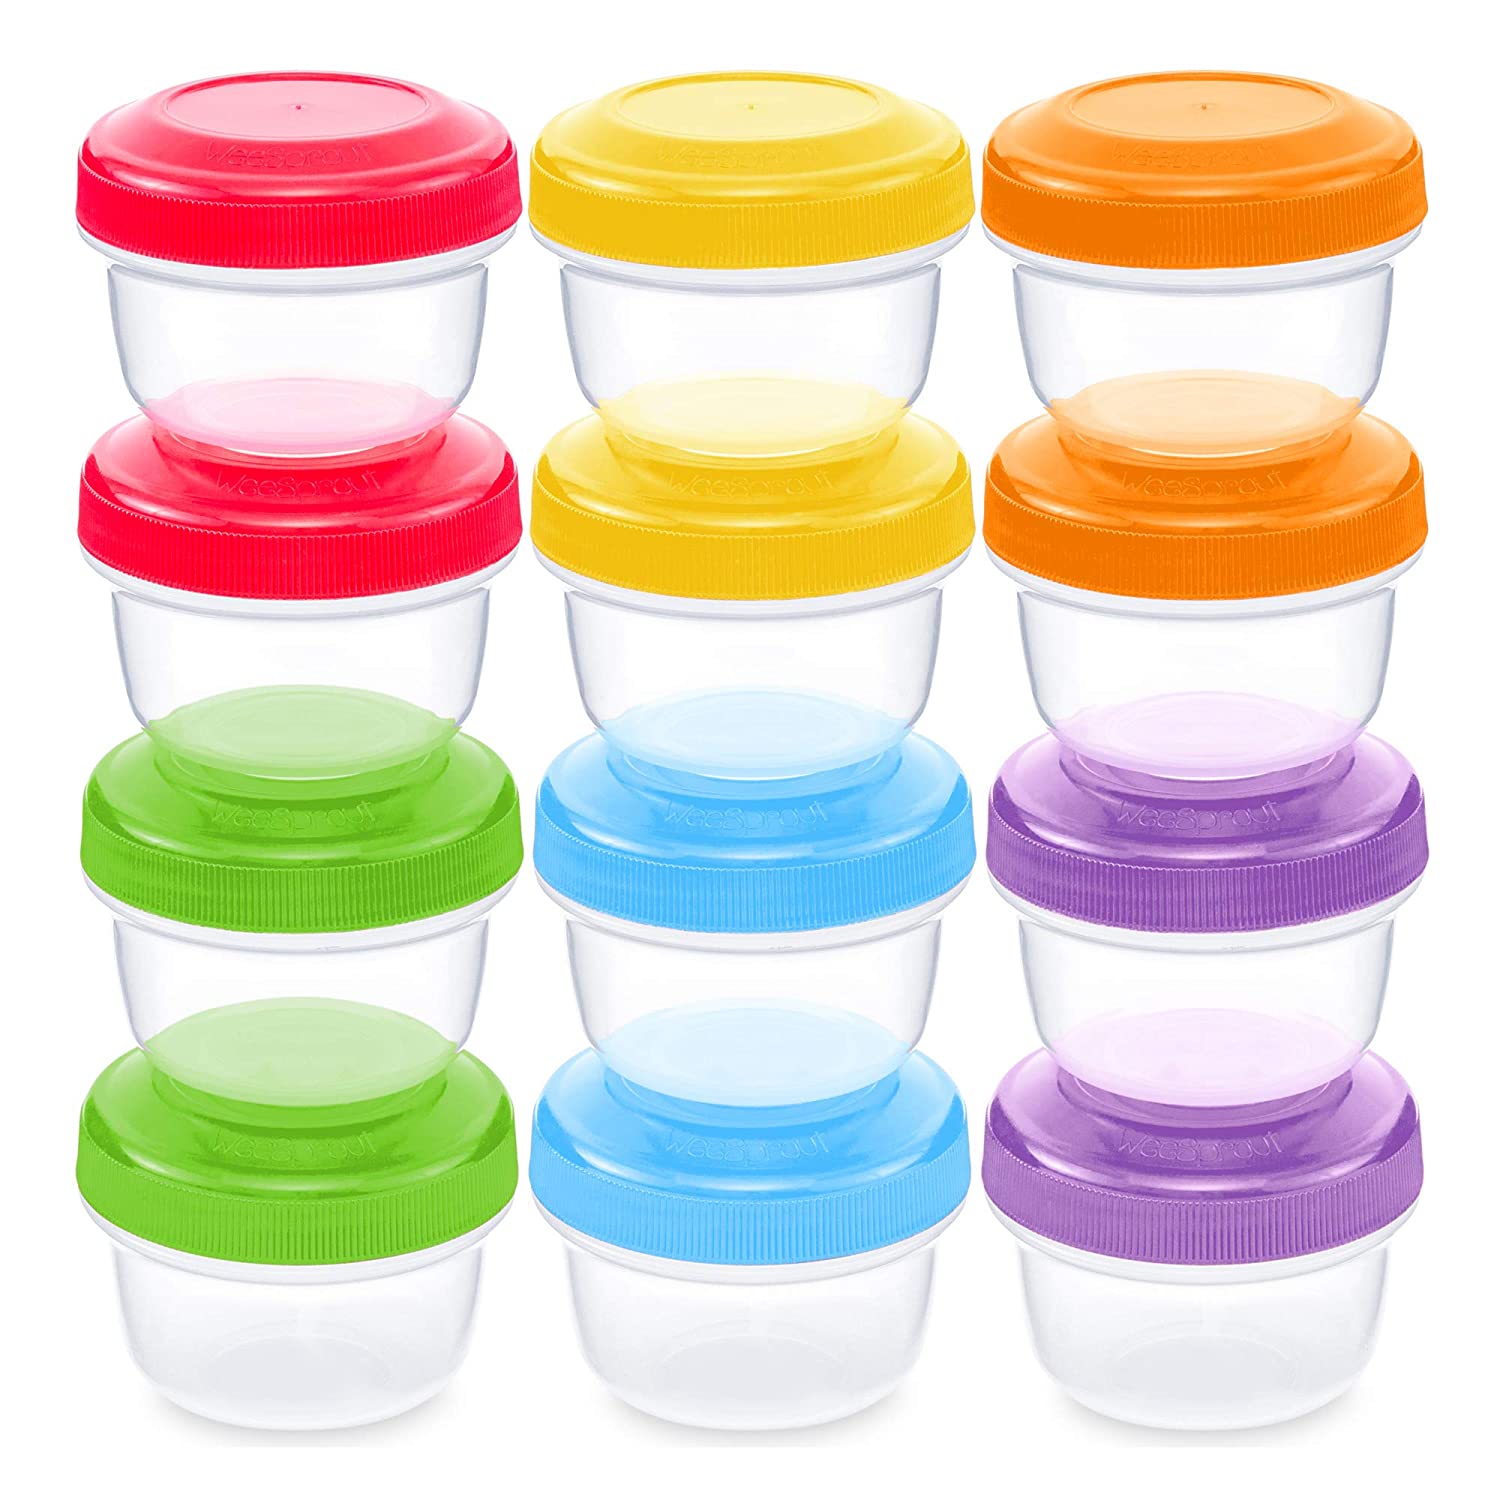 Leakproof Baby Food Storage | 12 Container Set | Premium BPA Free Small Plastic Containers with Lids Lock in Freshness, Nutrients & Flavor